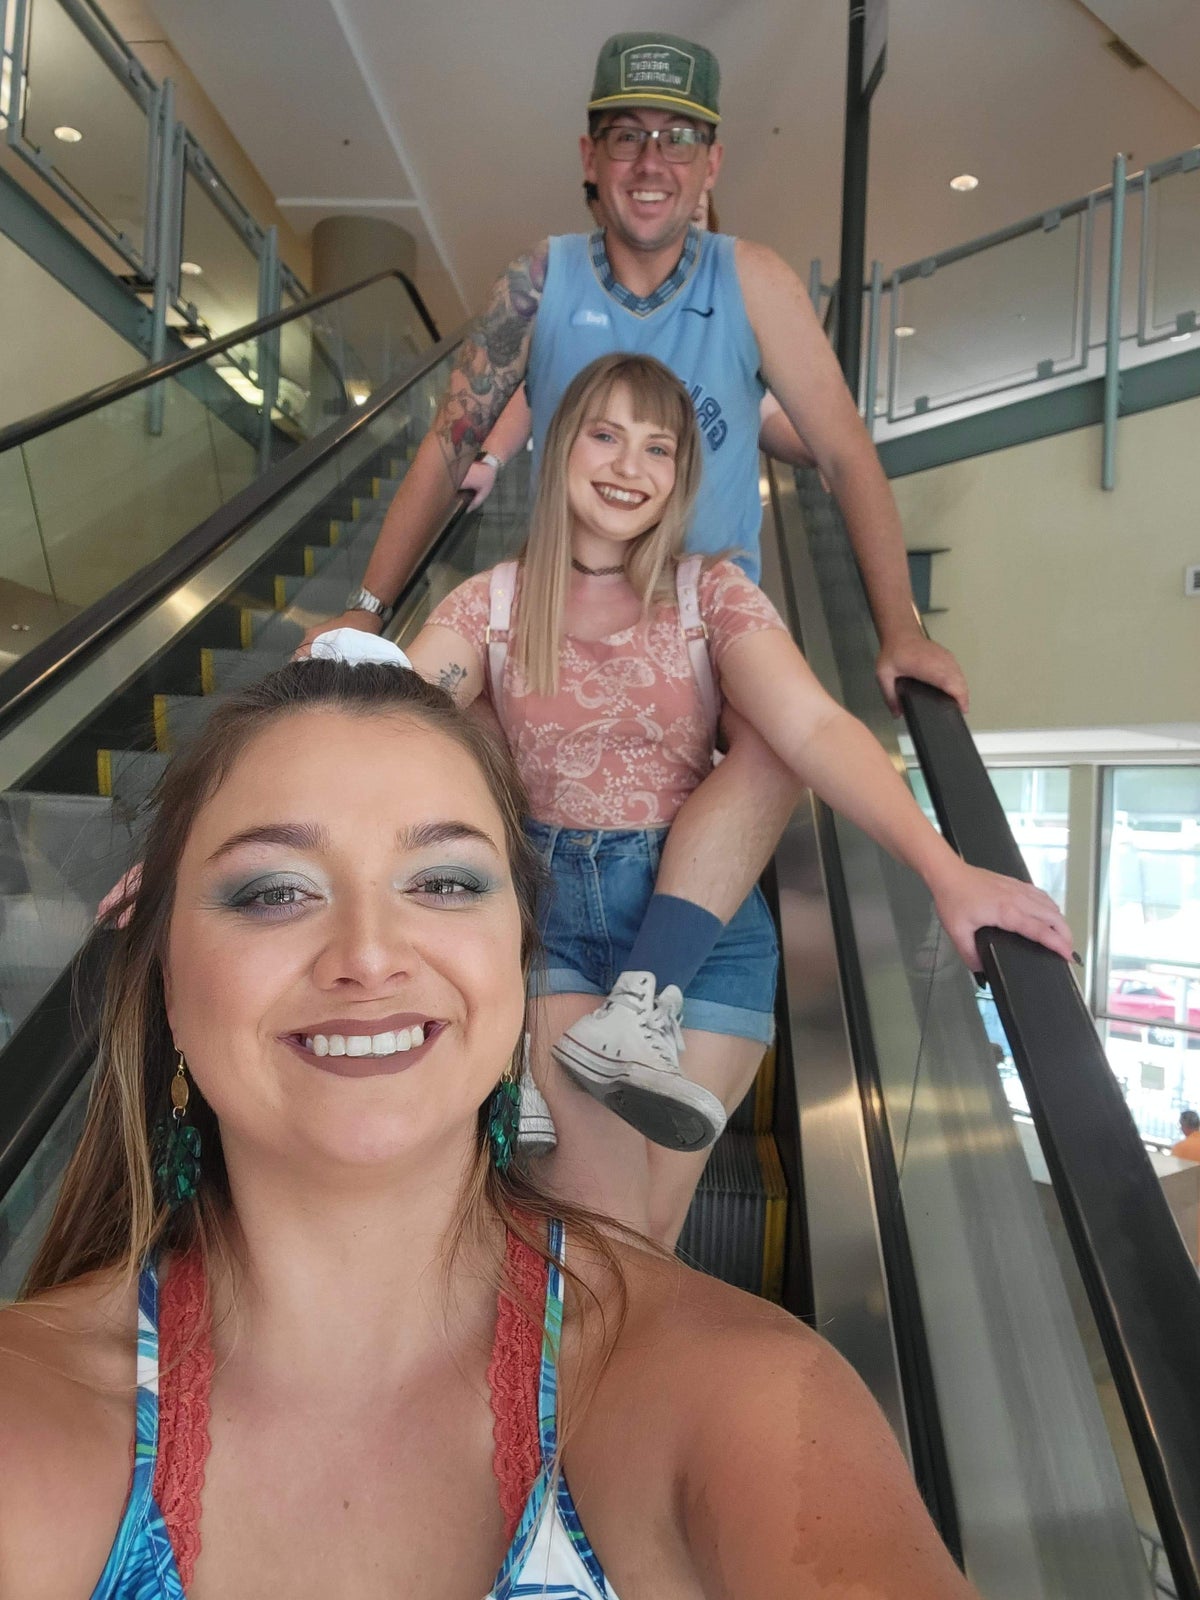 Throuple who went viral after meeting on Tinder say strangers hoped they’d break up 